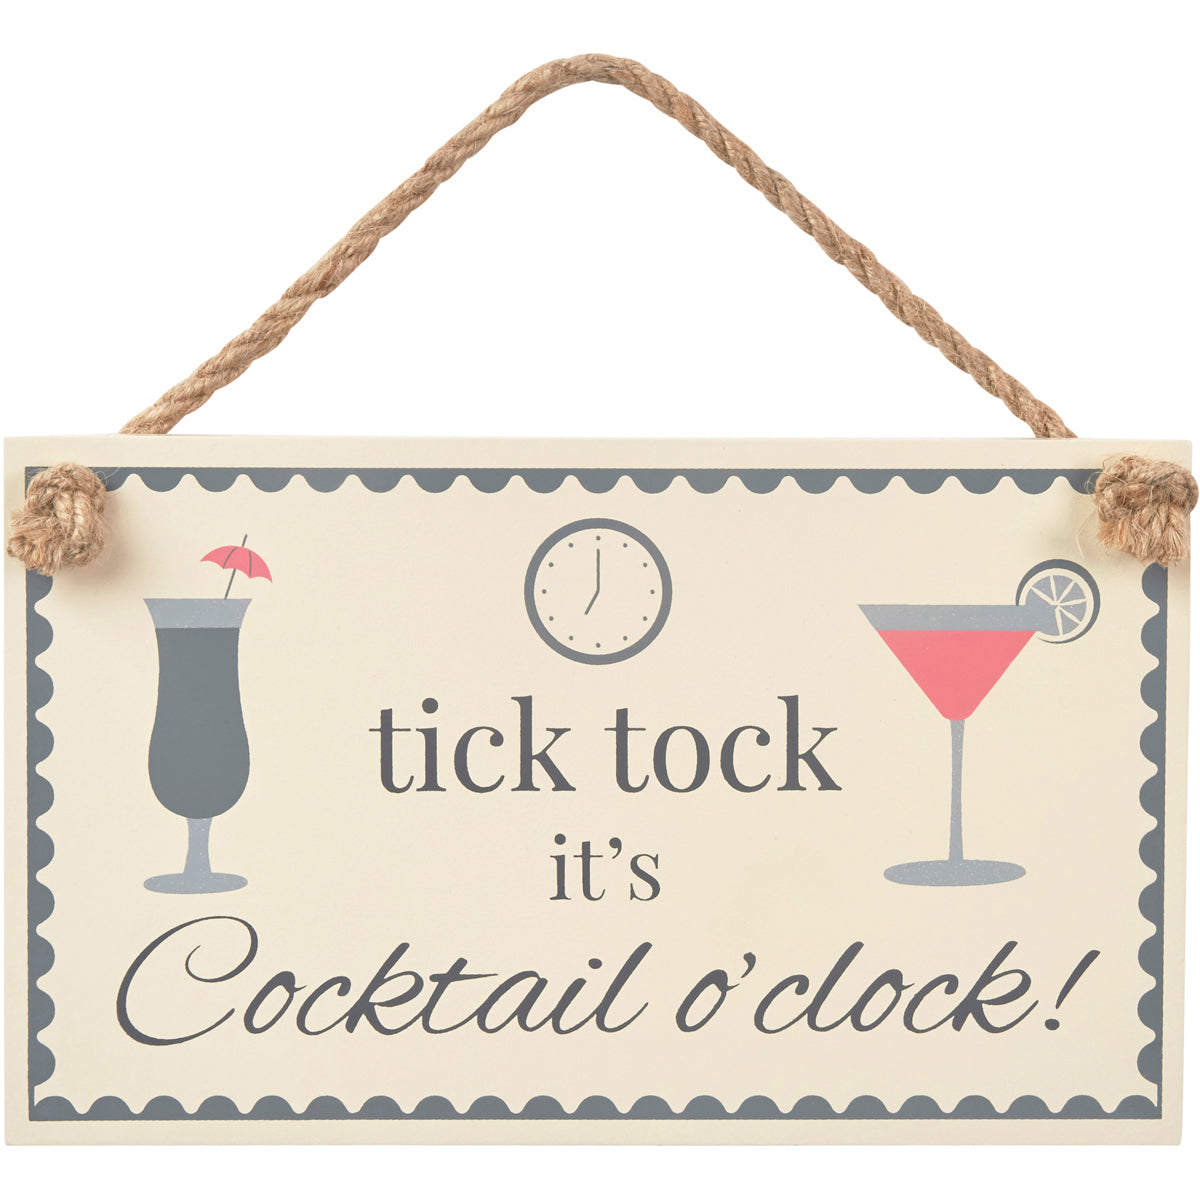 Wooden sign with cocktail image and includes slogan: Tick, Tock, It's Cocktail O'Clock